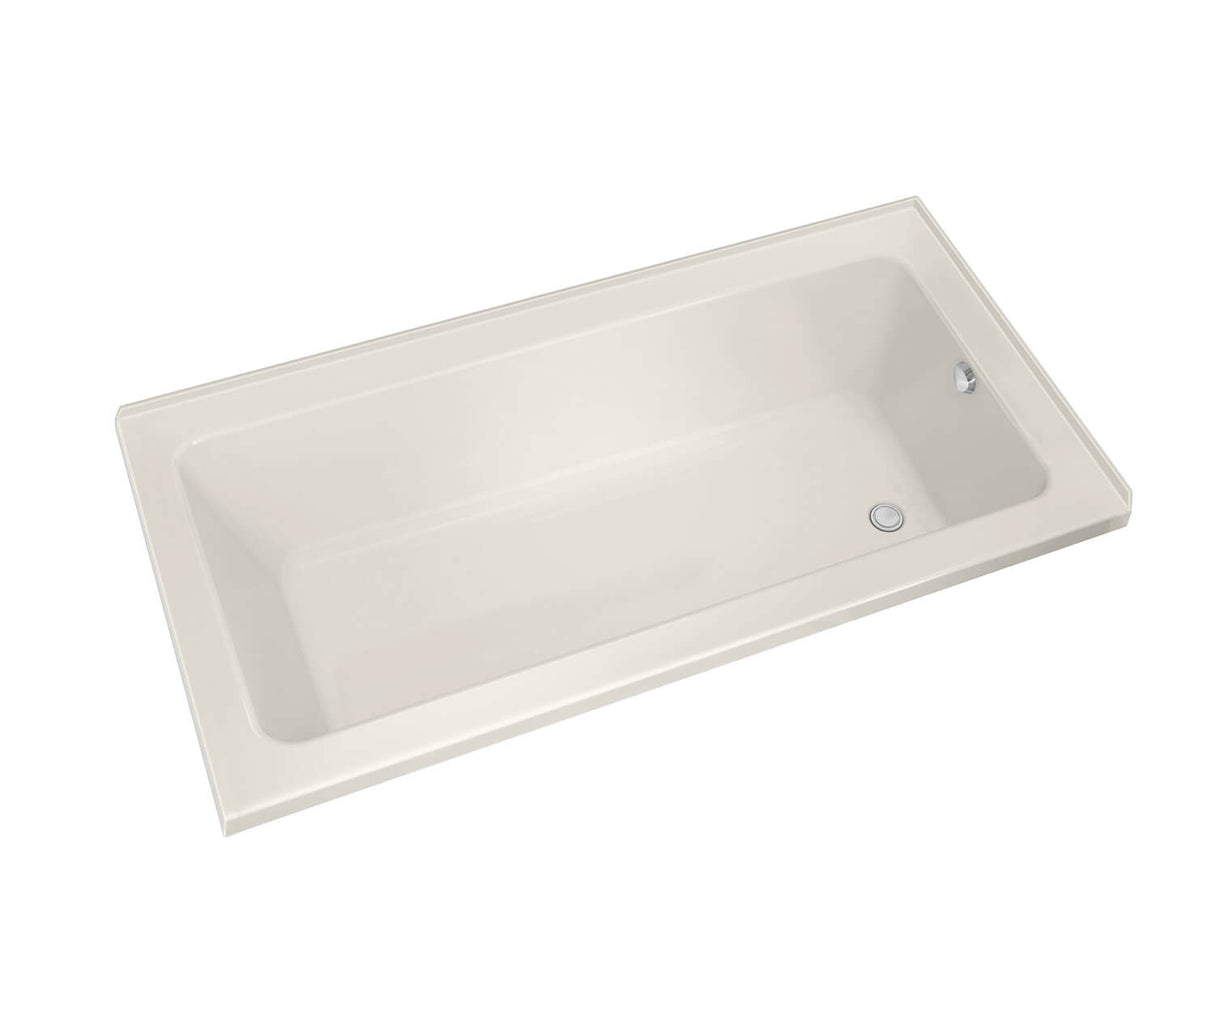 MAAX 106203-L-000-007 Pose 6032 IF Acrylic Corner Right Left-Hand Drain Bathtub in Biscuit